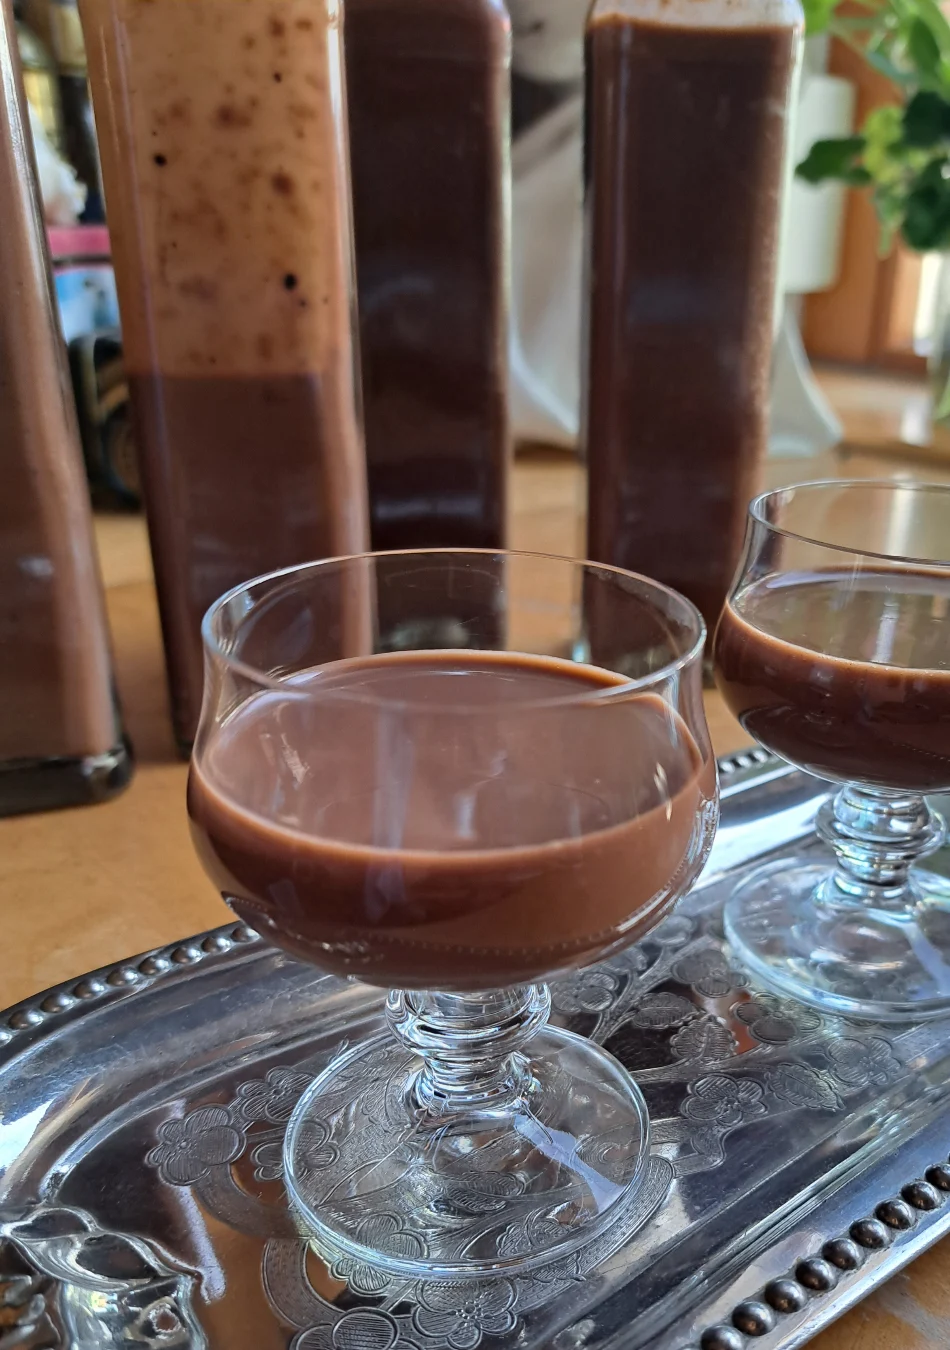 Glass filled with velvety homemade chocolate egg liqueur, surrounded by tempting bottles of the exquisite liqueur in the background, showcasing a delightful array of indulgent treats.